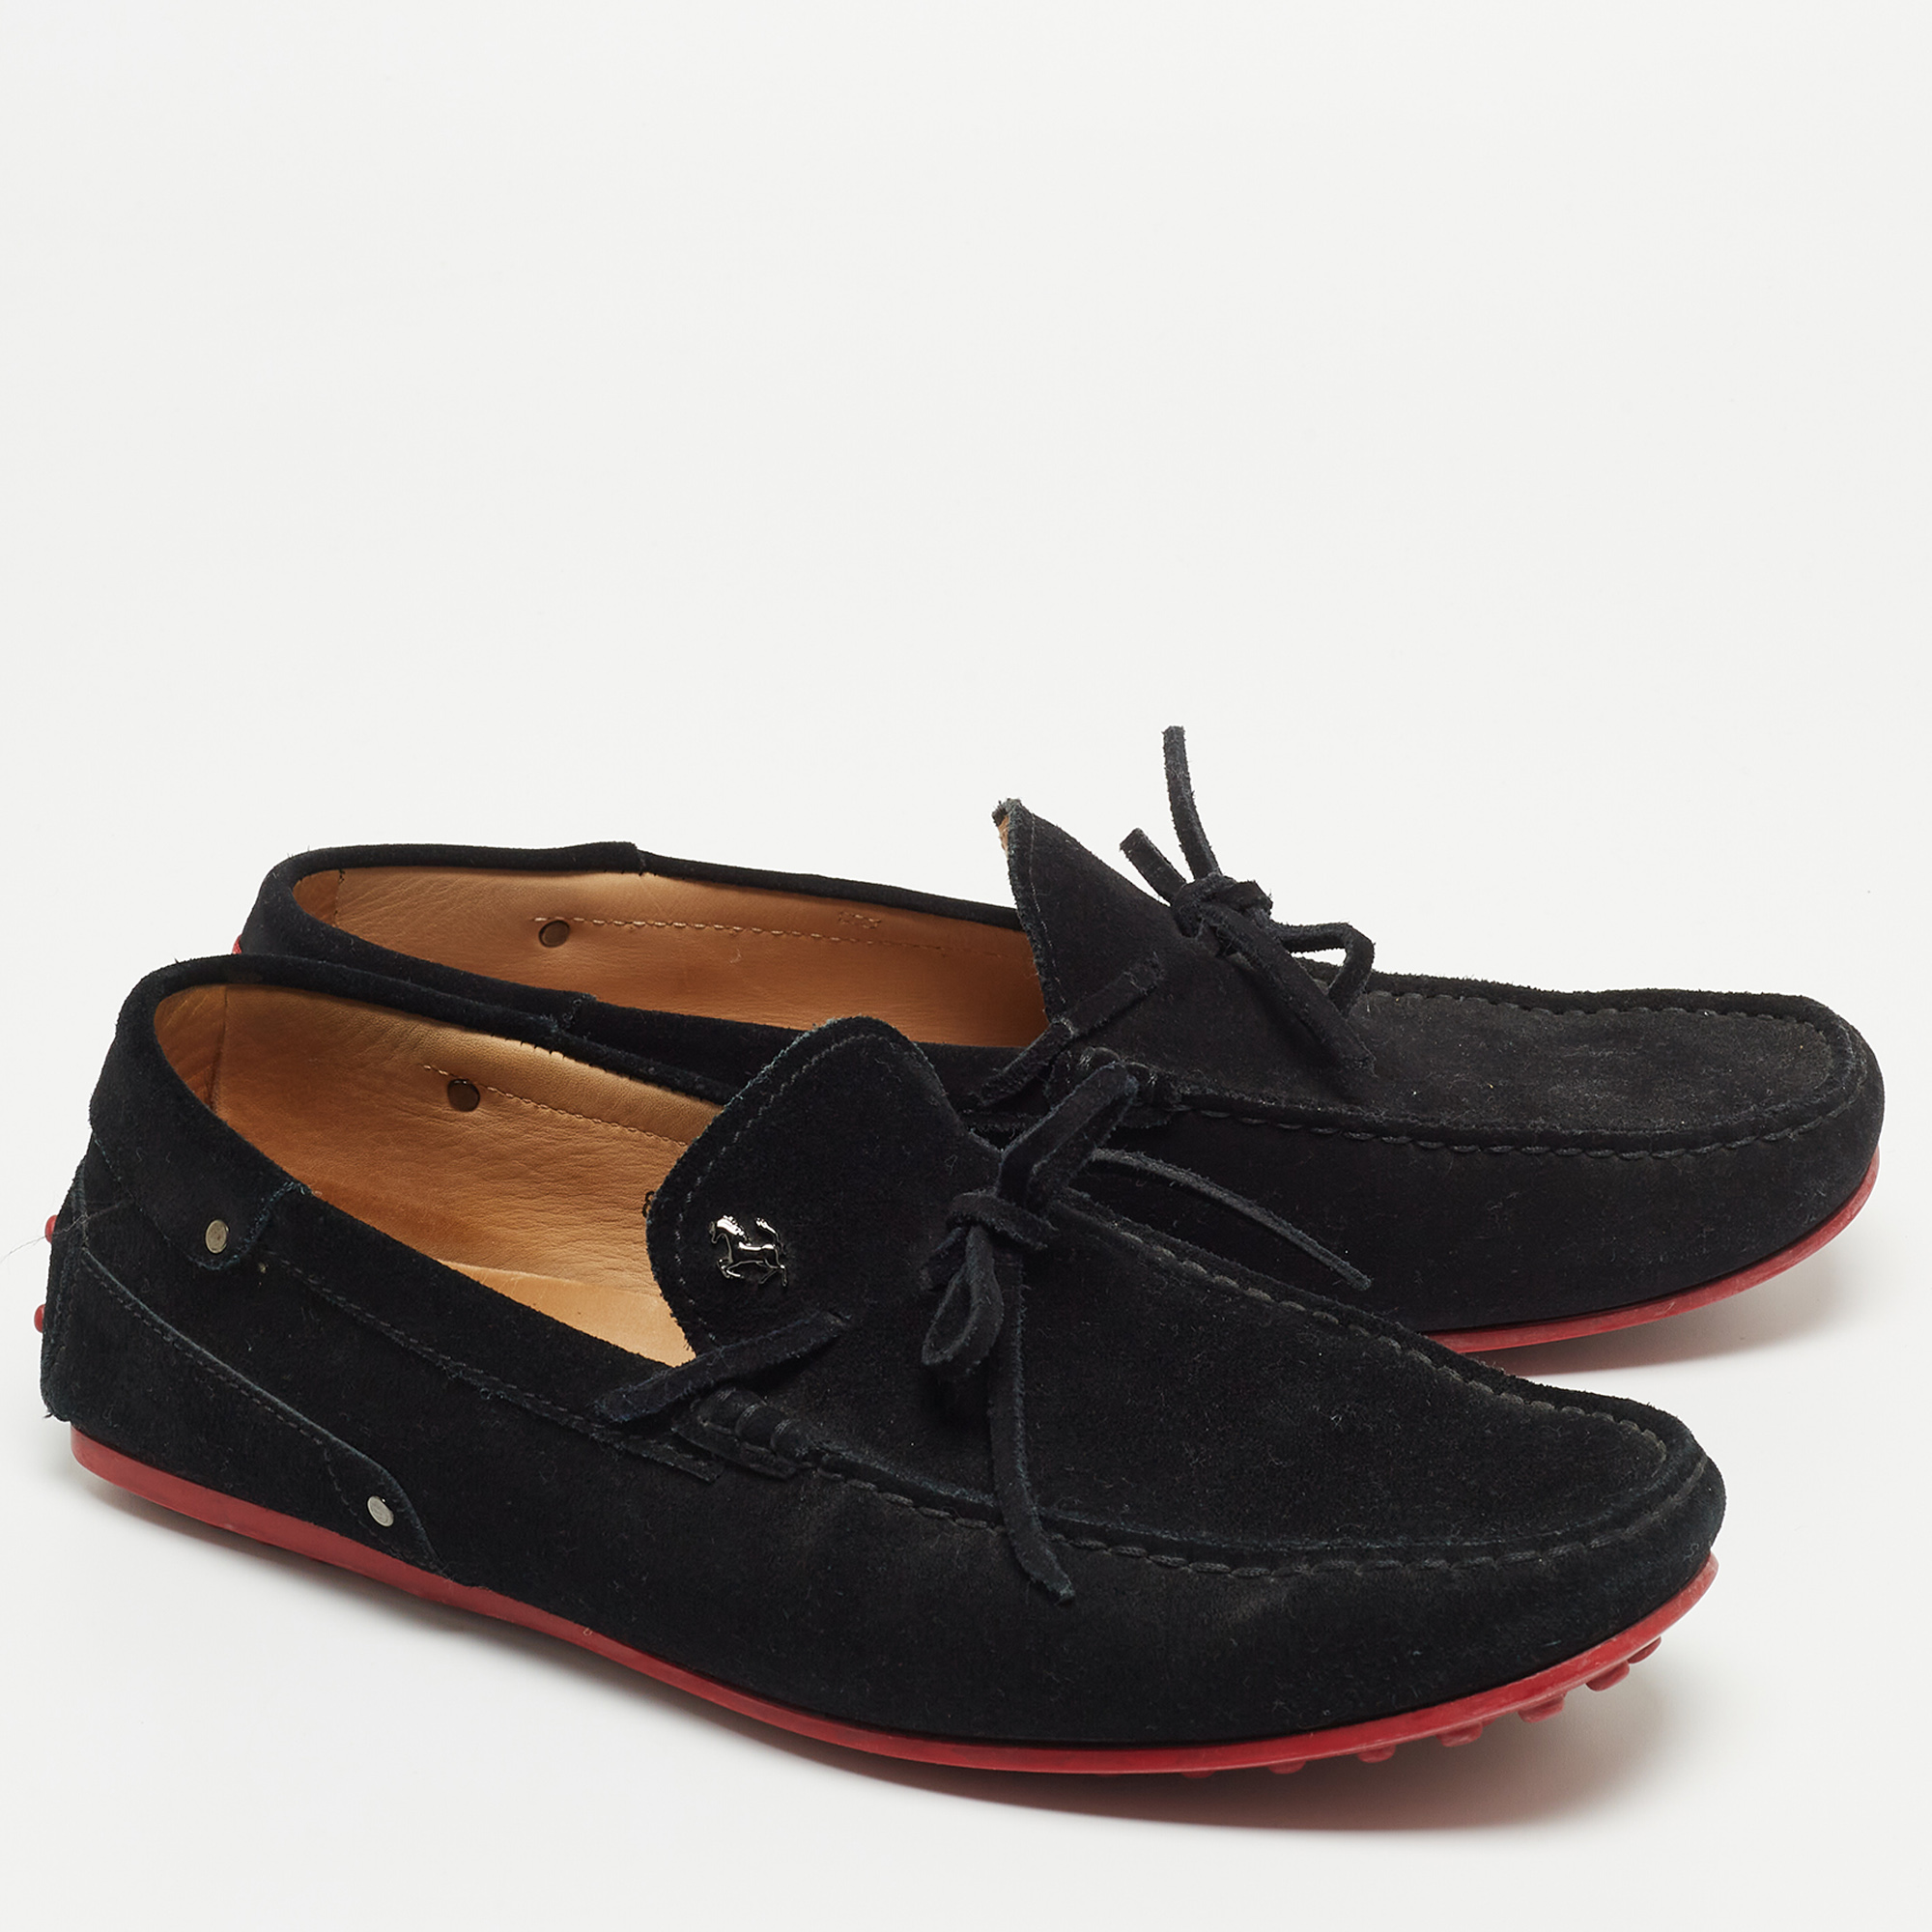 Tod's For Ferrari Black Suede Bow Loafers Size 42.5